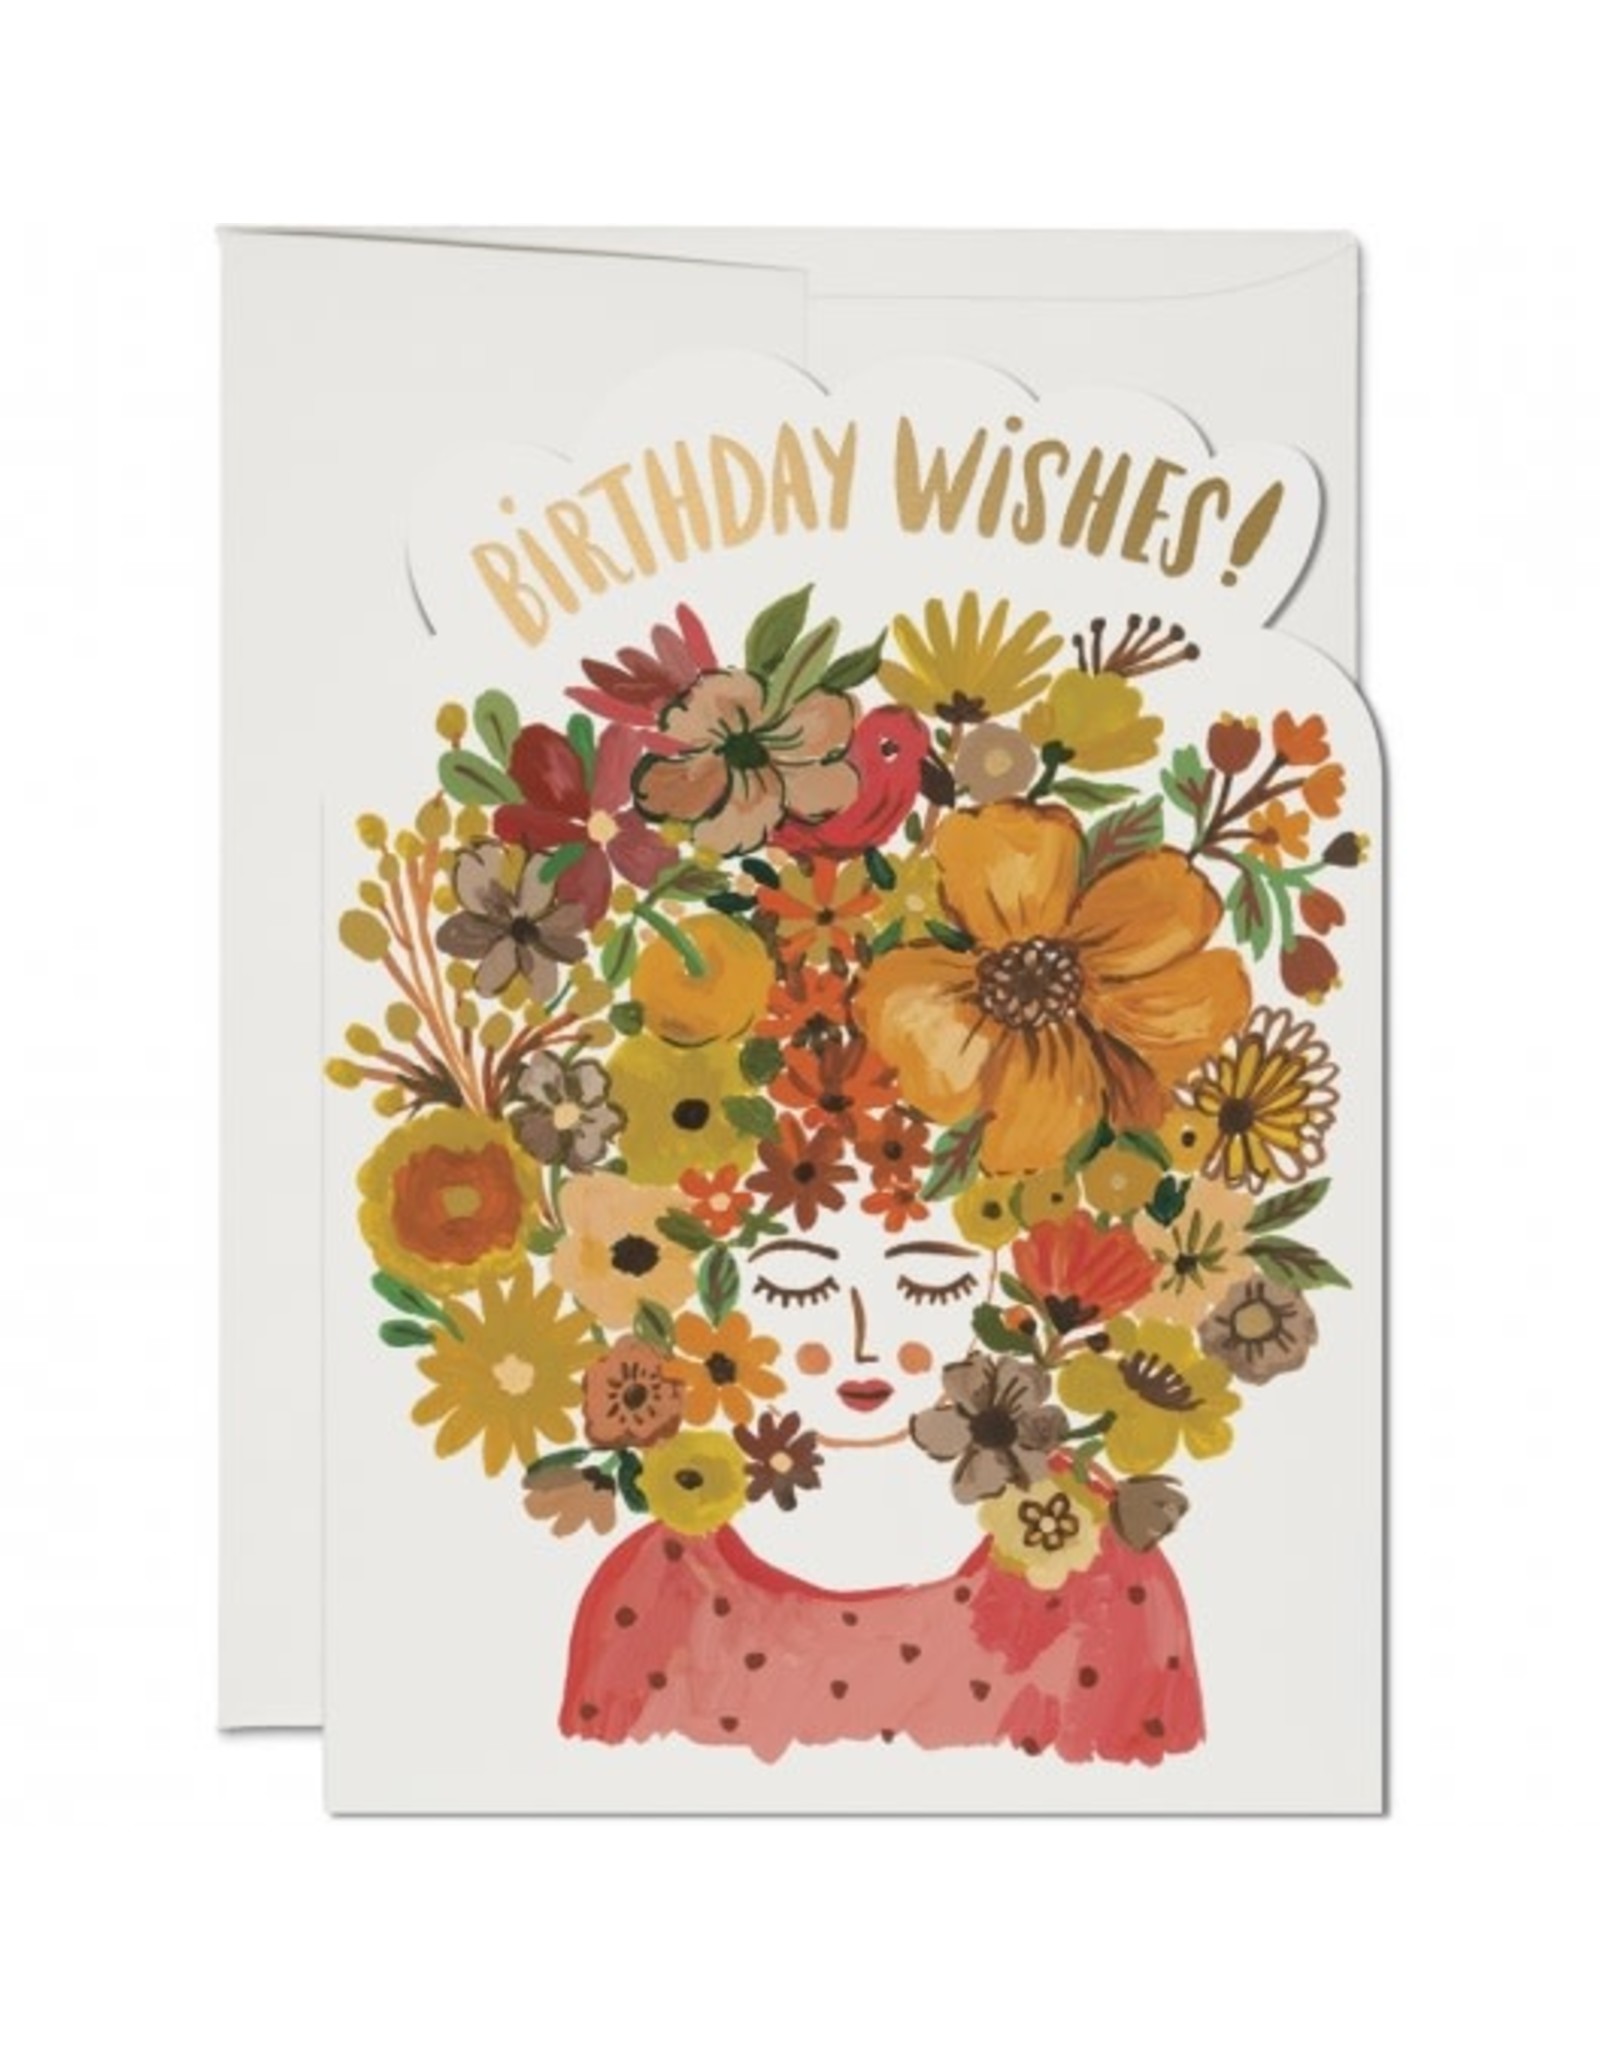 Red Cap Cards Floral Tresses Birthday A7 Notecard